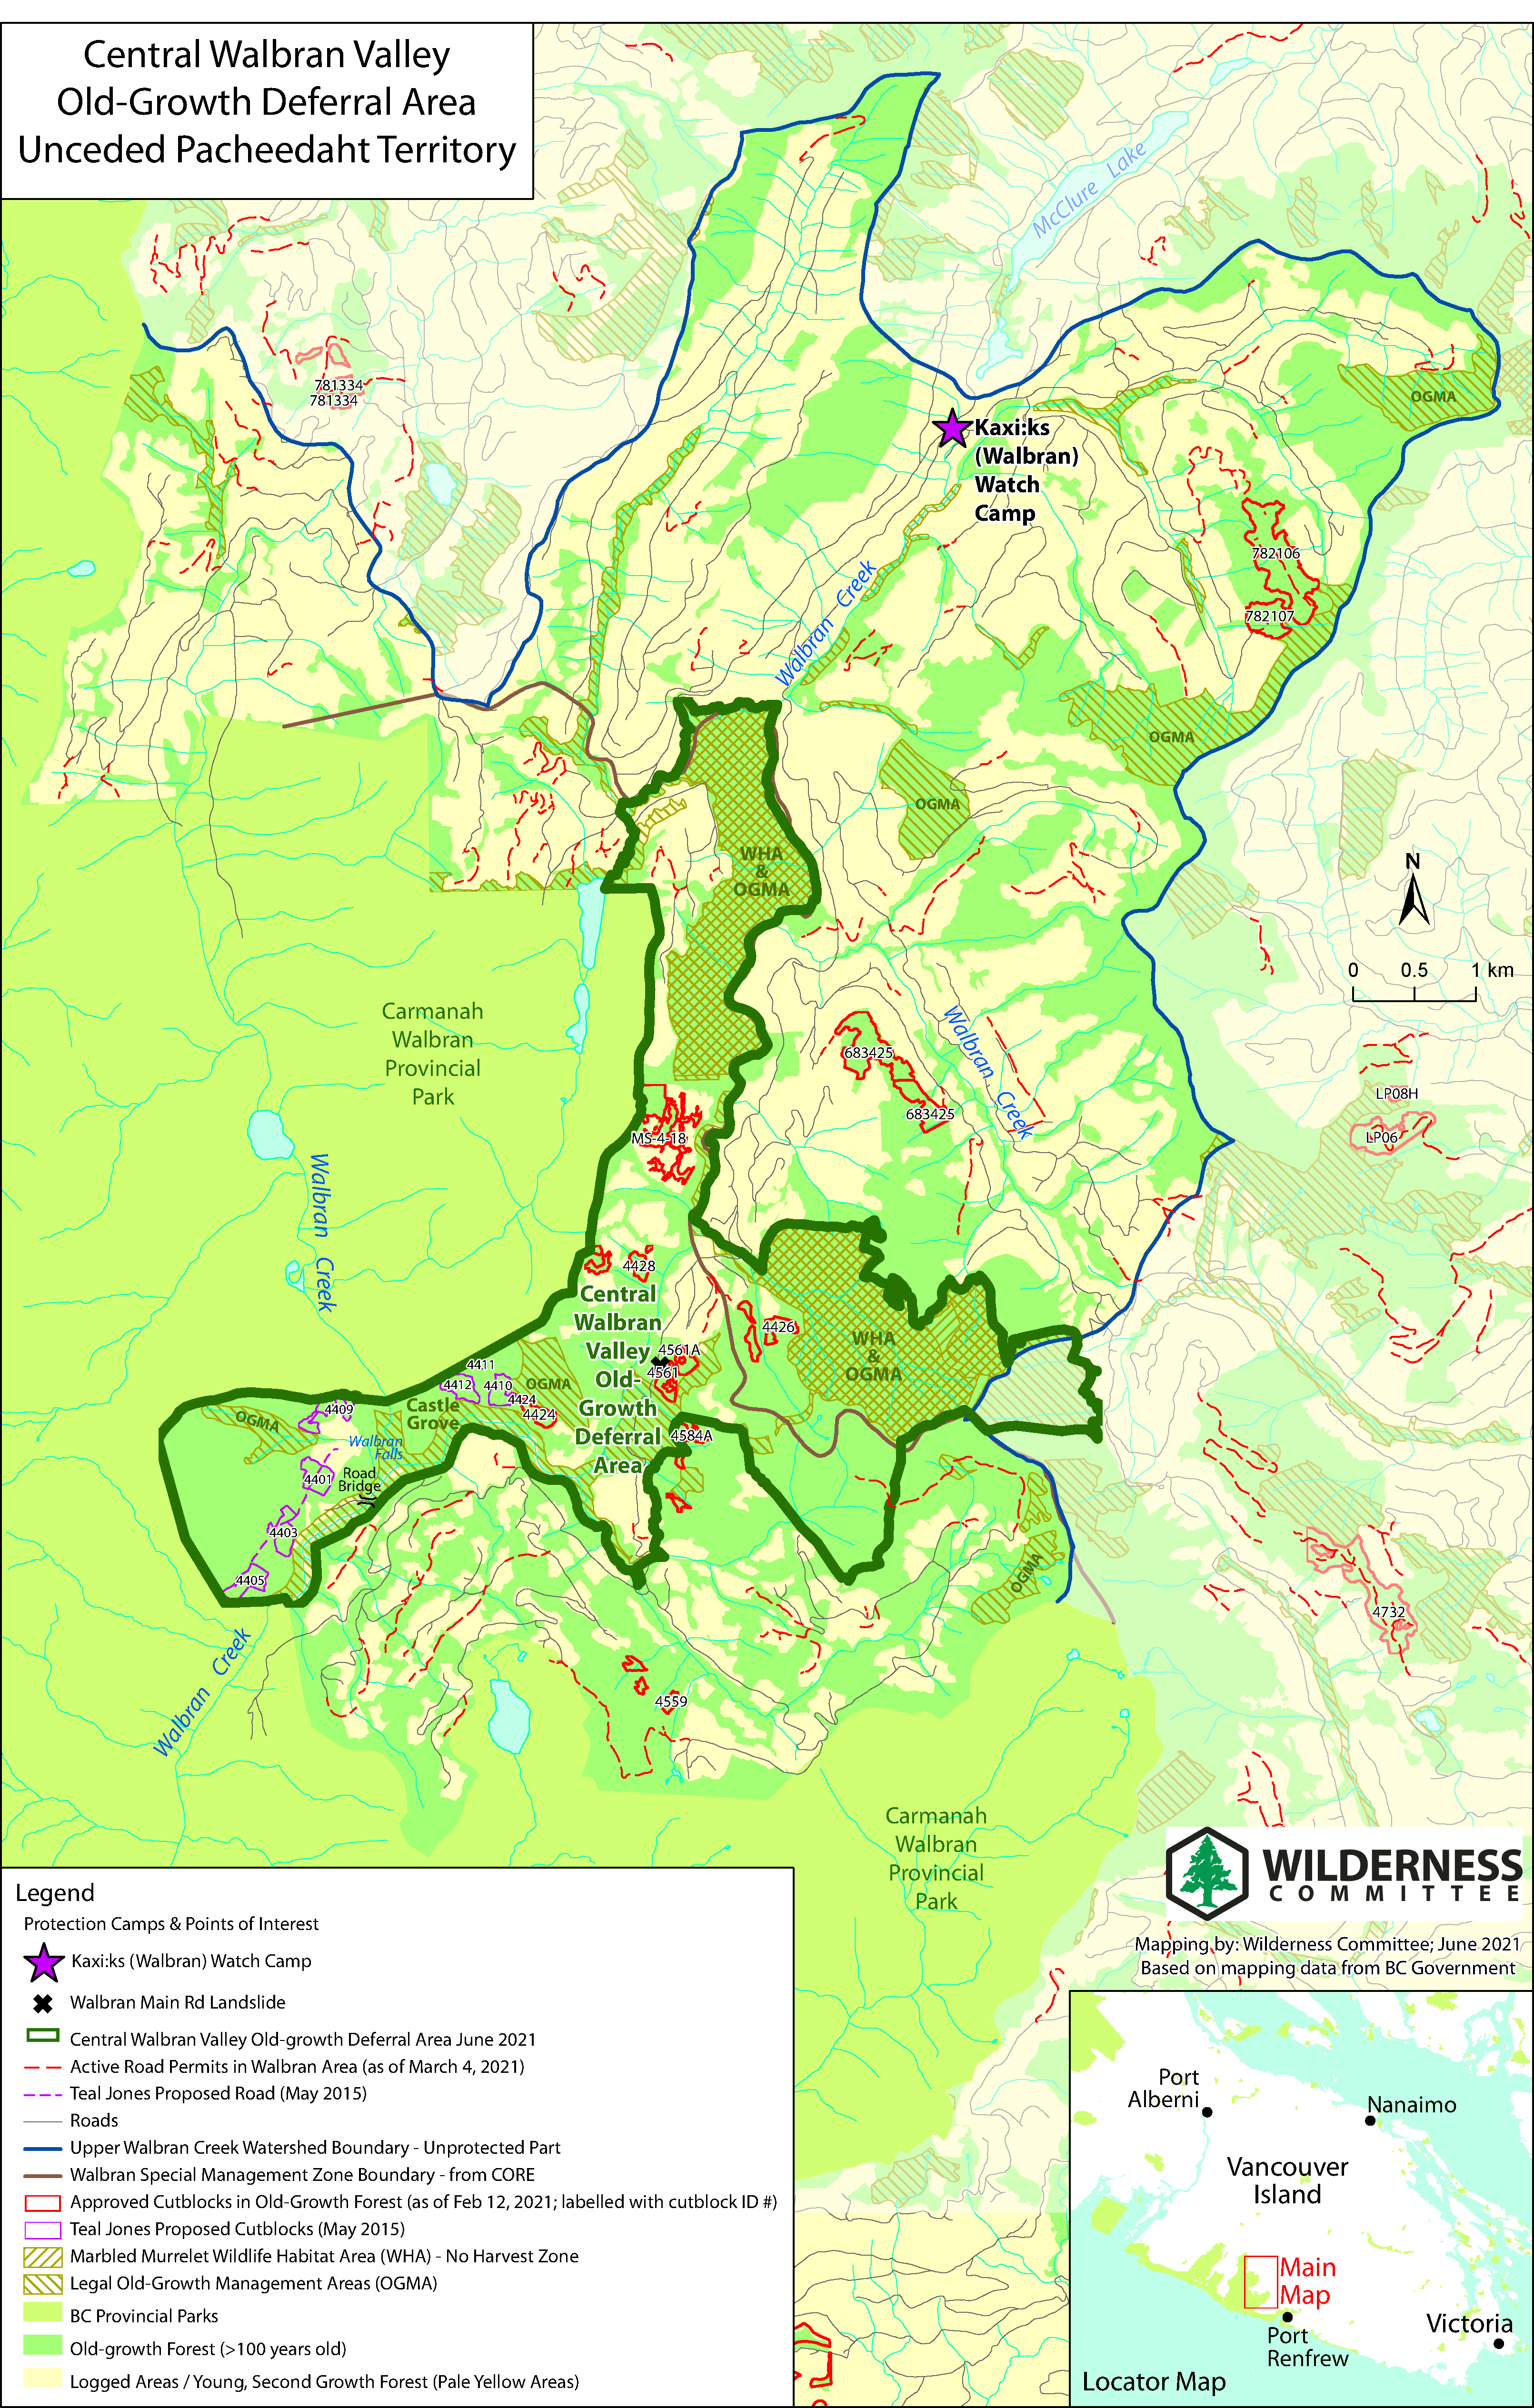 Central Walbran Valley Old-growth Deferral Area